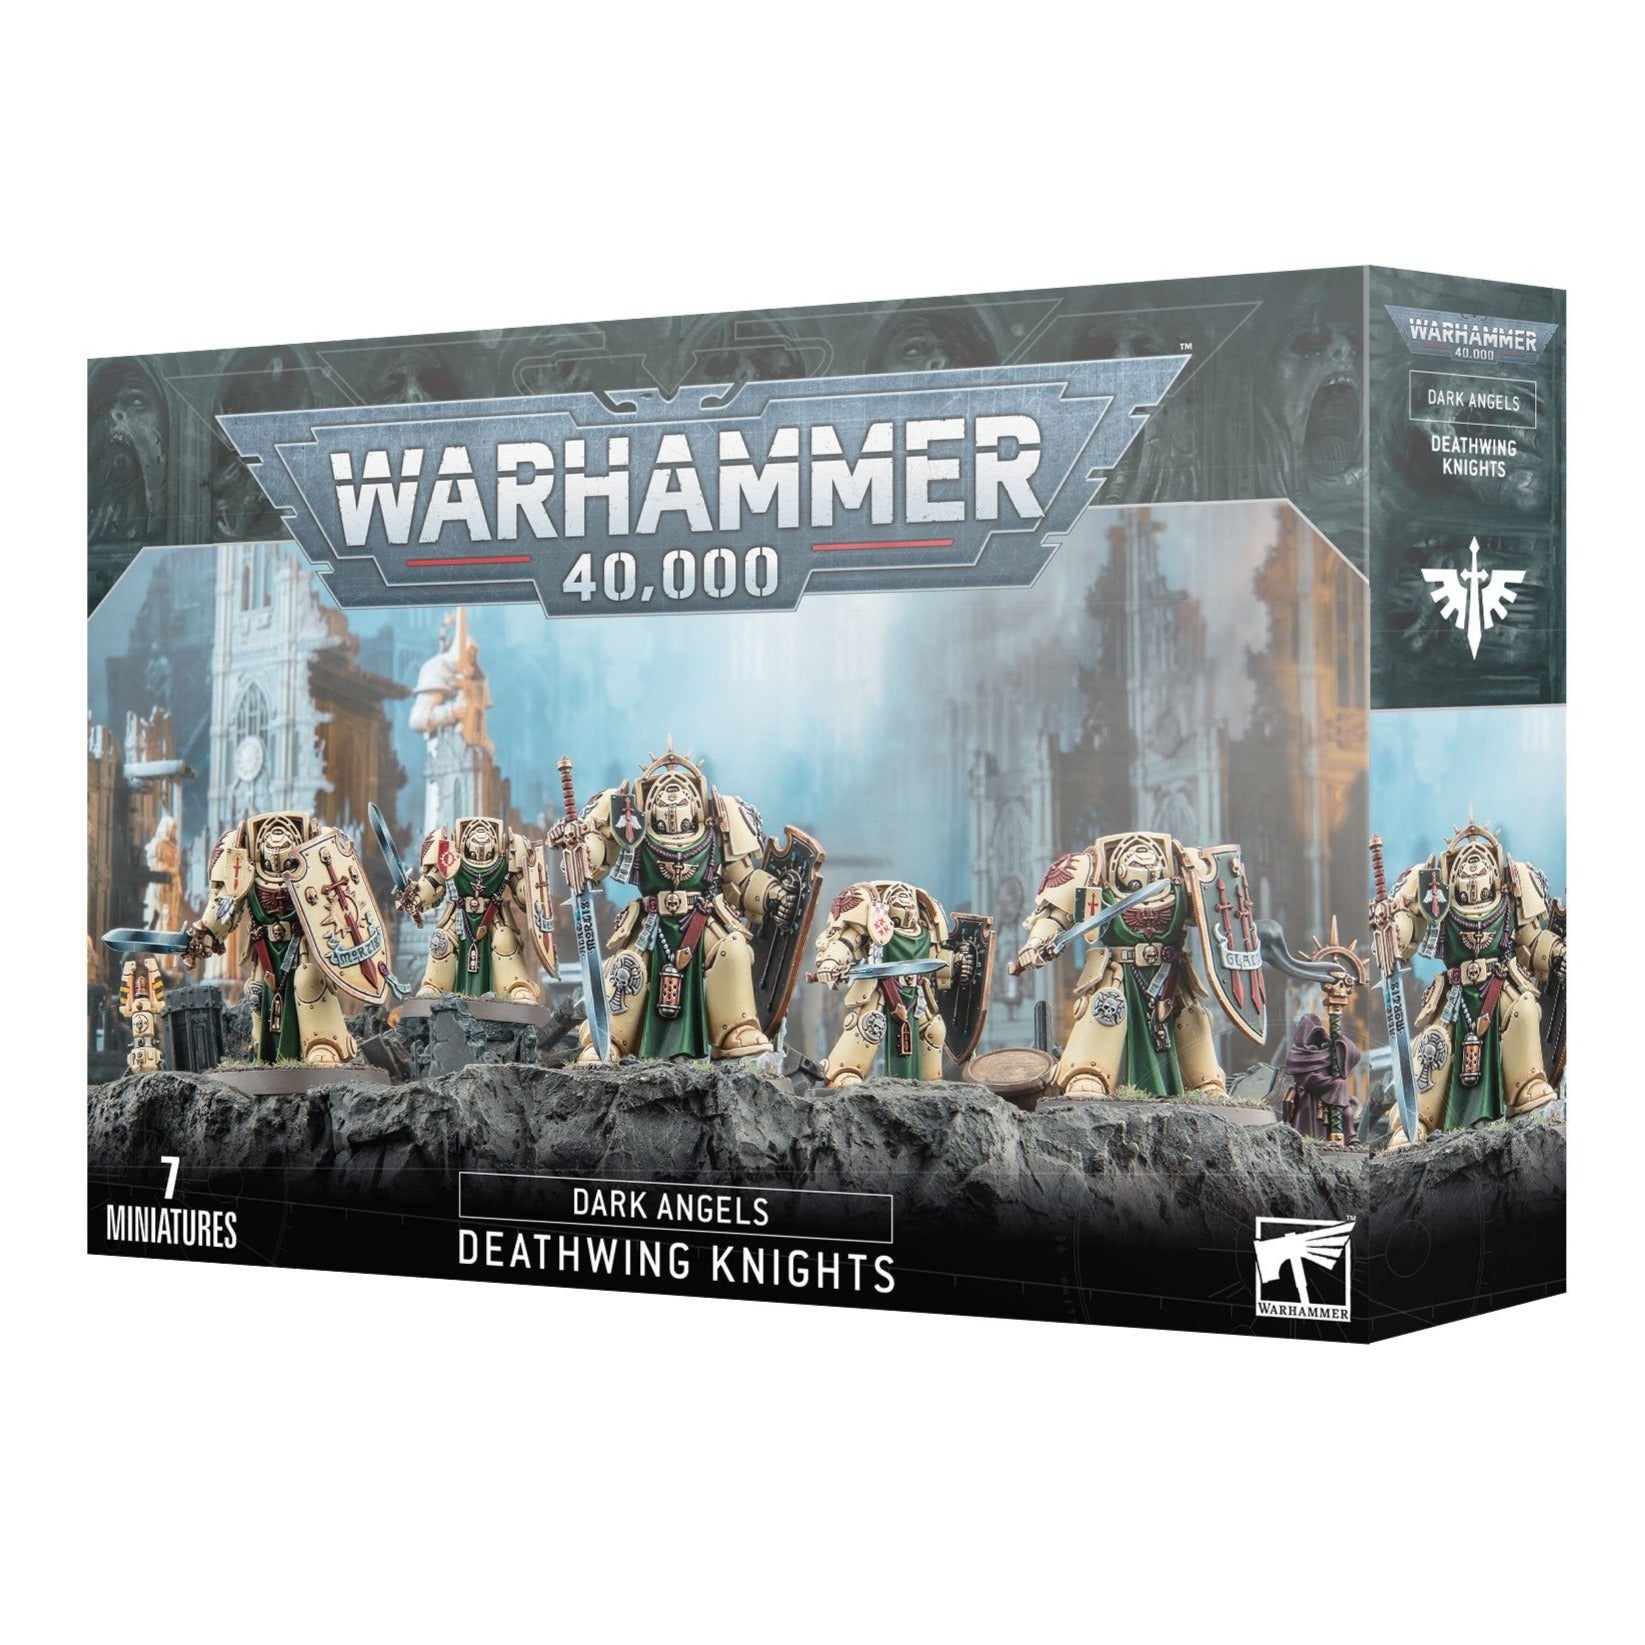 Dark Angels: Deathwing Knights - Release Date 9/3/24 - Loaded Dice